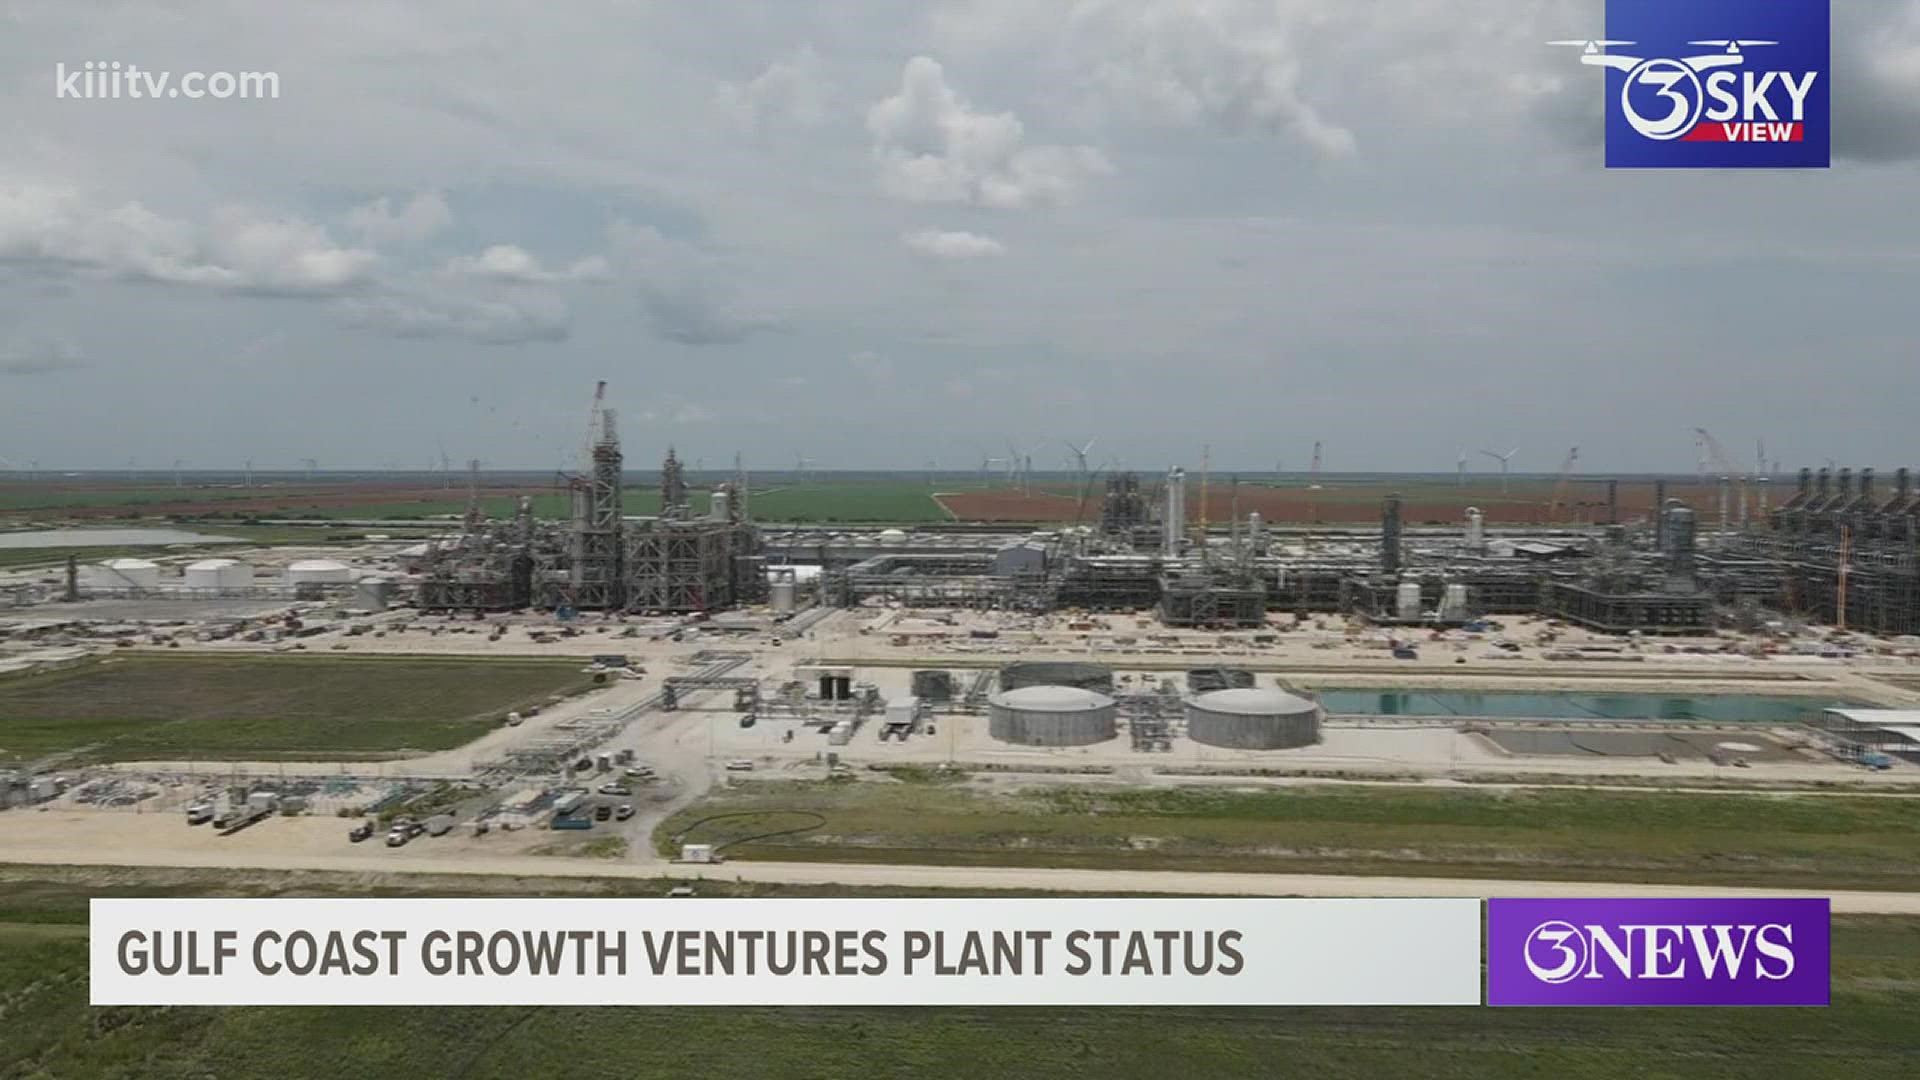 Currently the plant has a little over 2,000 construction workers on site.